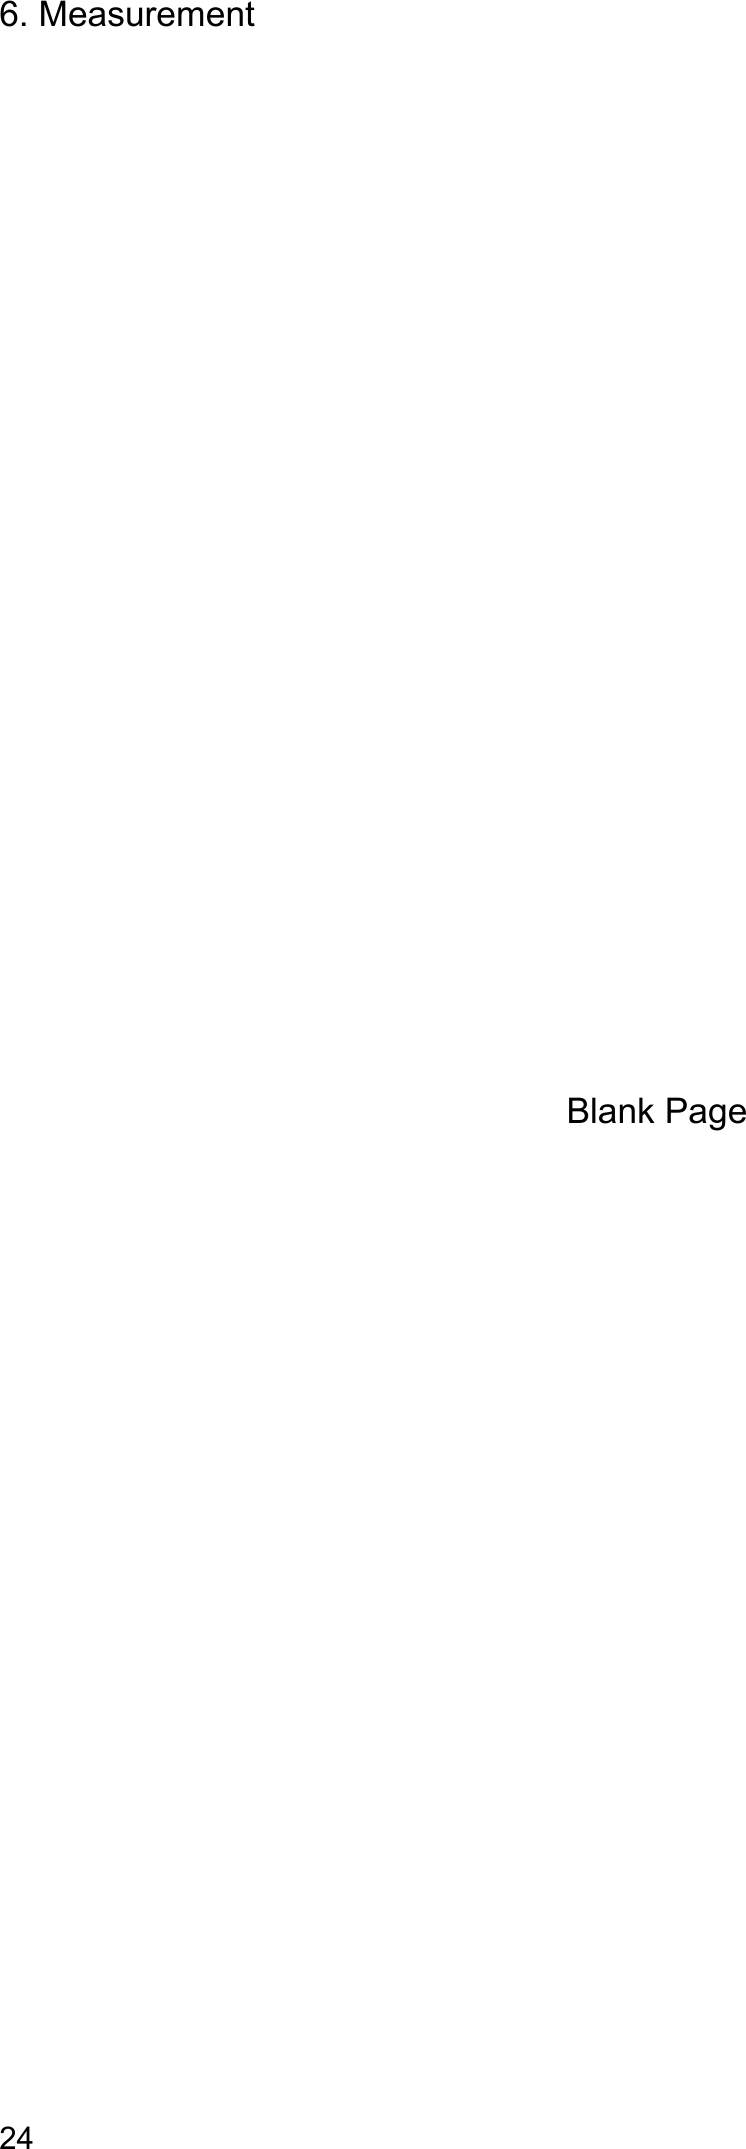 6. Measurement   24                        Blank Page  